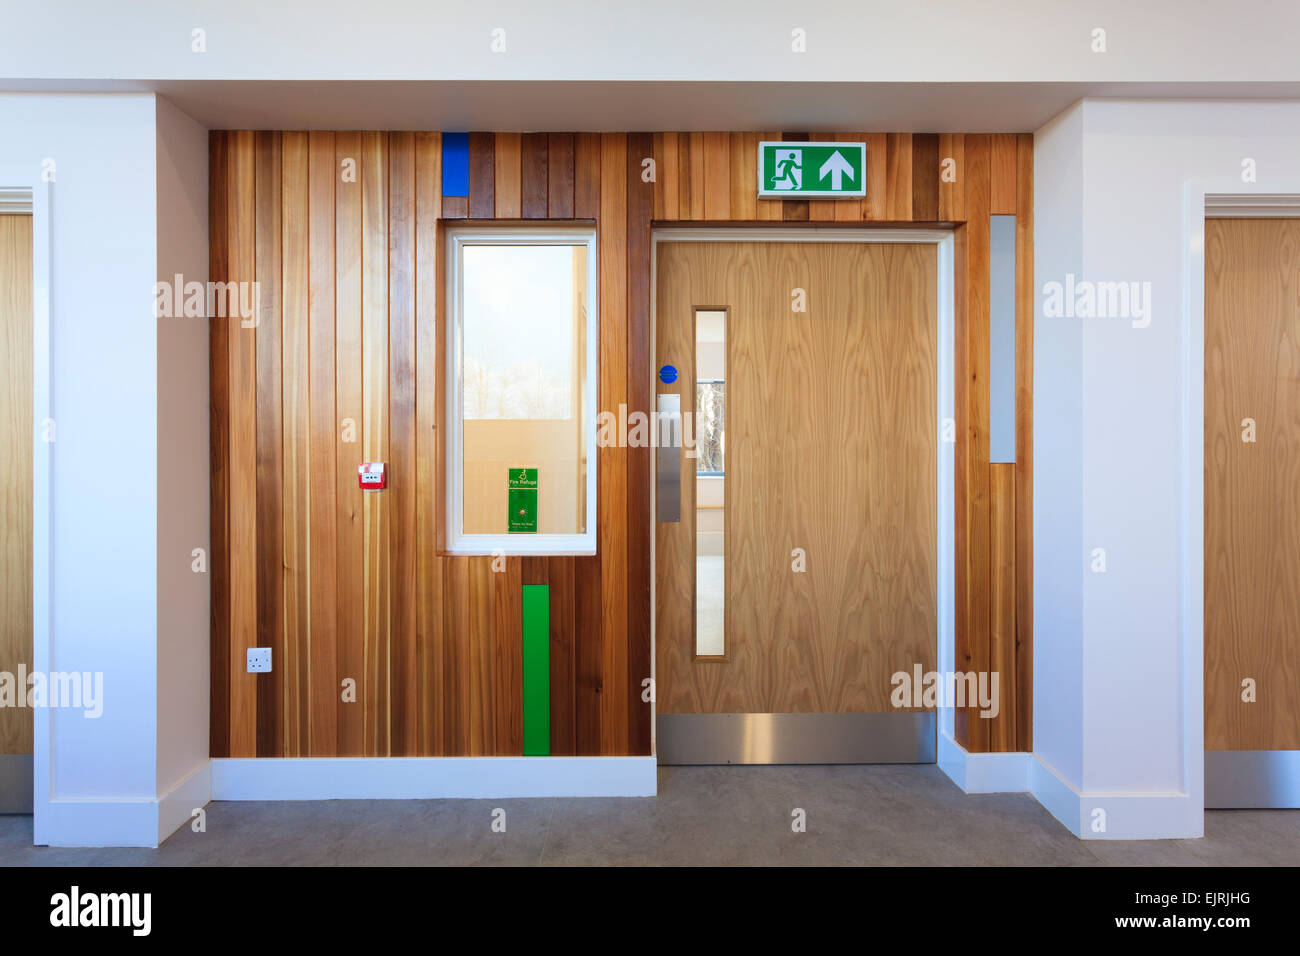 doorway with timberclad surround in modern building without people Stock Photo